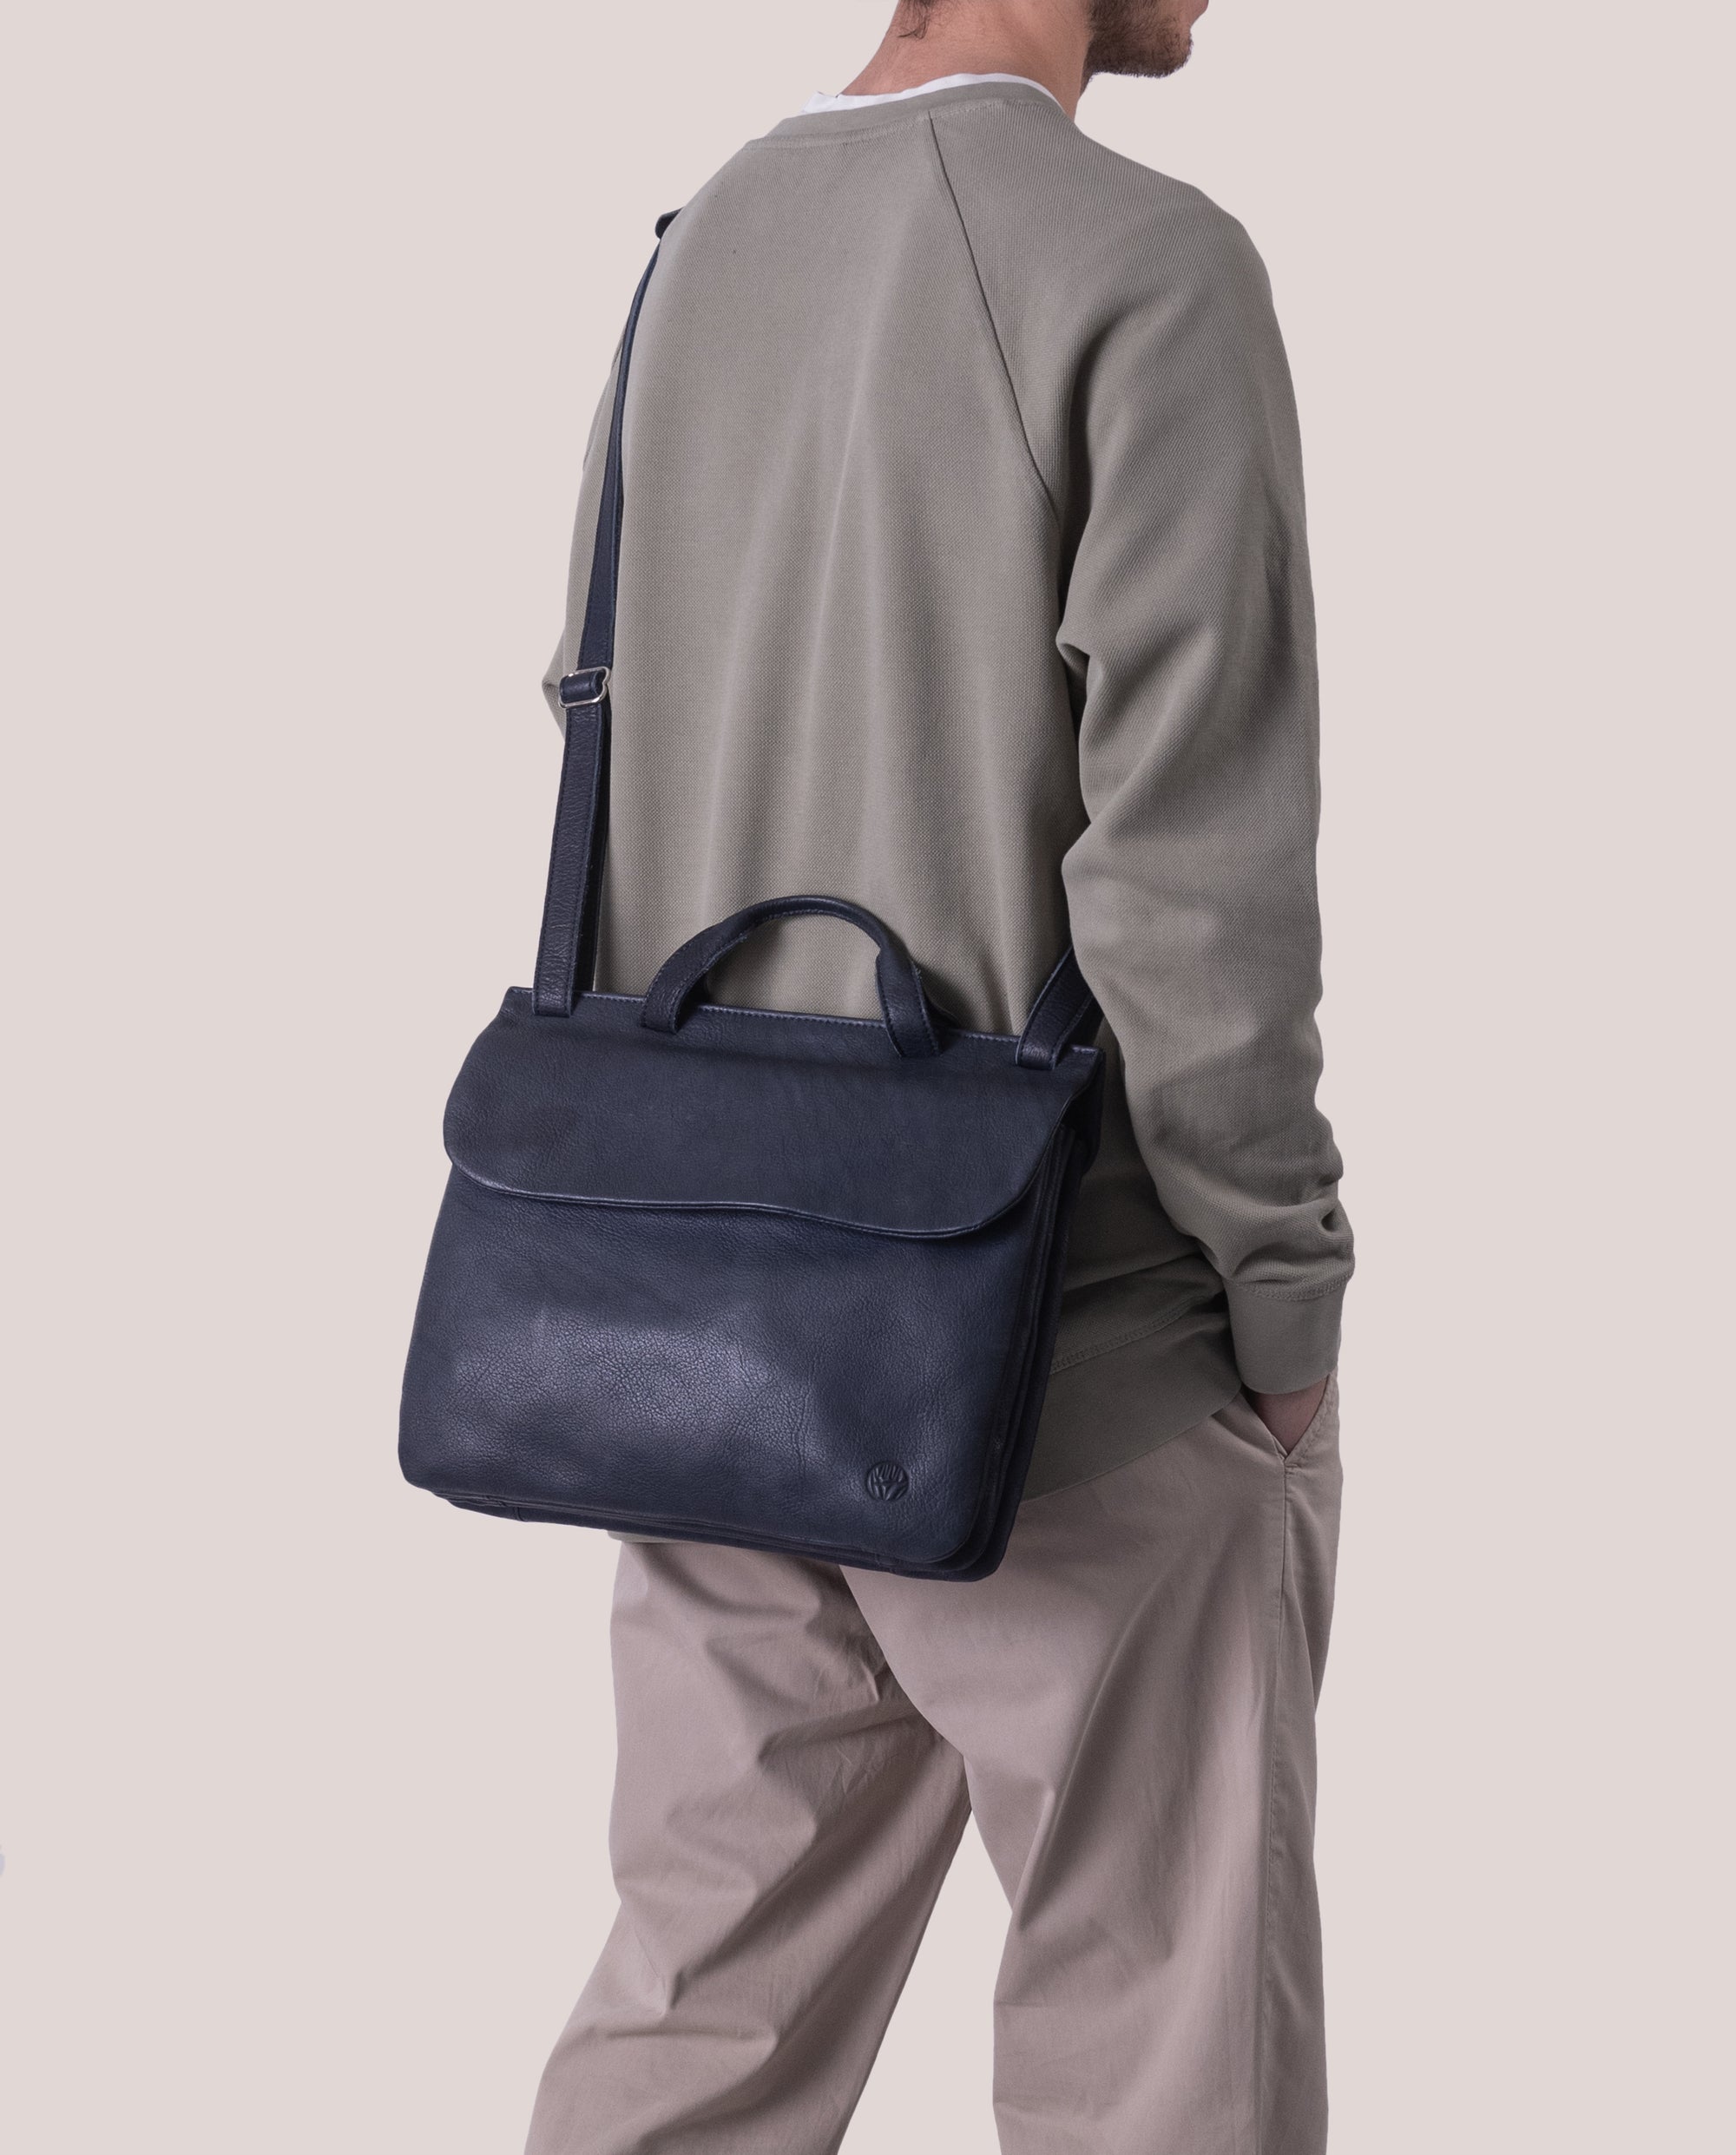 Chacoral smooth Business Bag